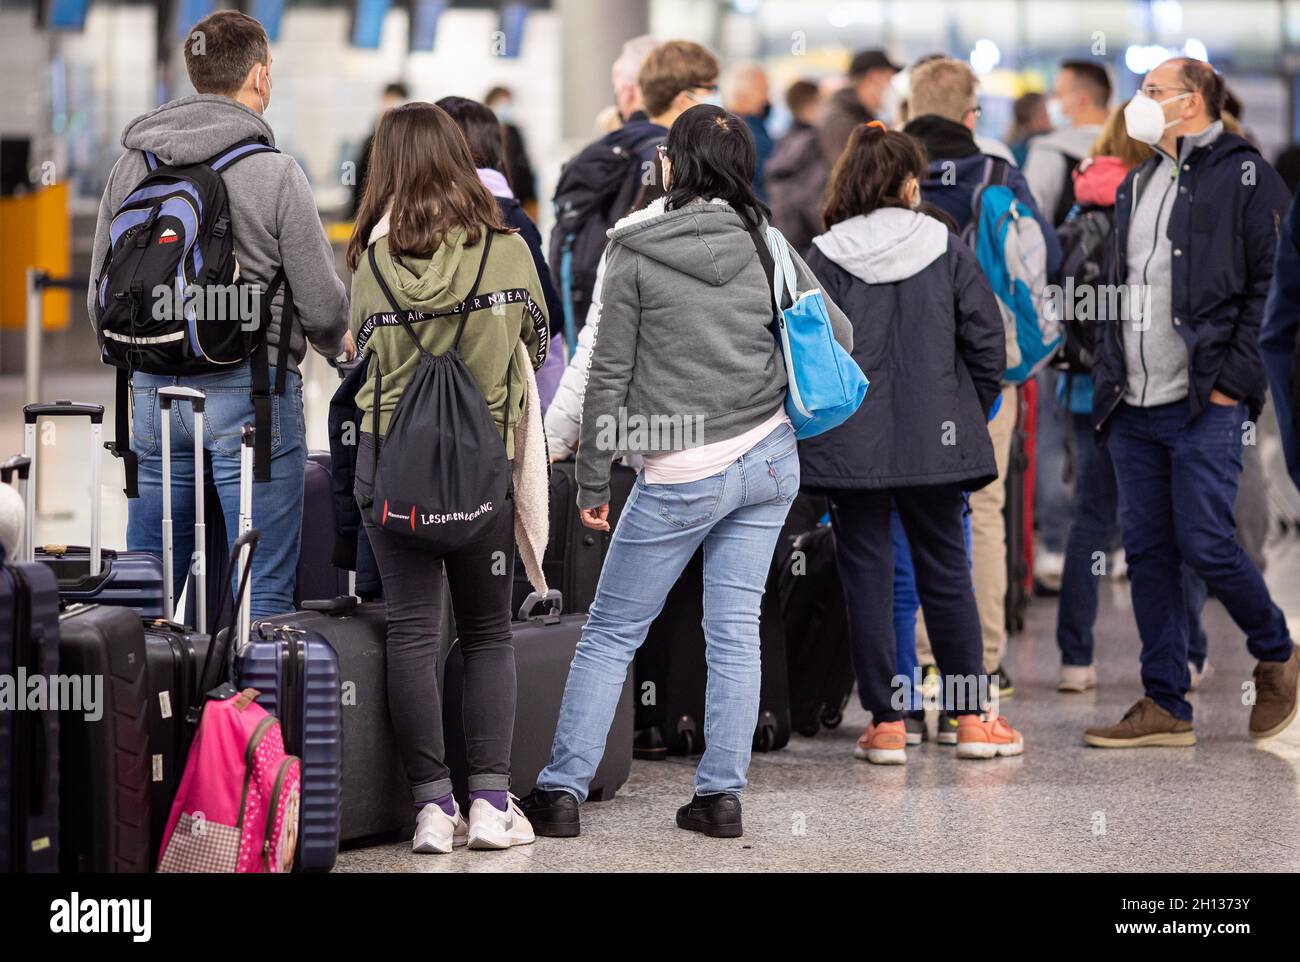 Langenhagen, Germany. 16th Oct, 2021. Numerous passengers are waiting at  Hannover-Langenhagen Airport. Because the service provider commissioned by  the Federal Police to carry out the handling checks has massive staffing  problems, there